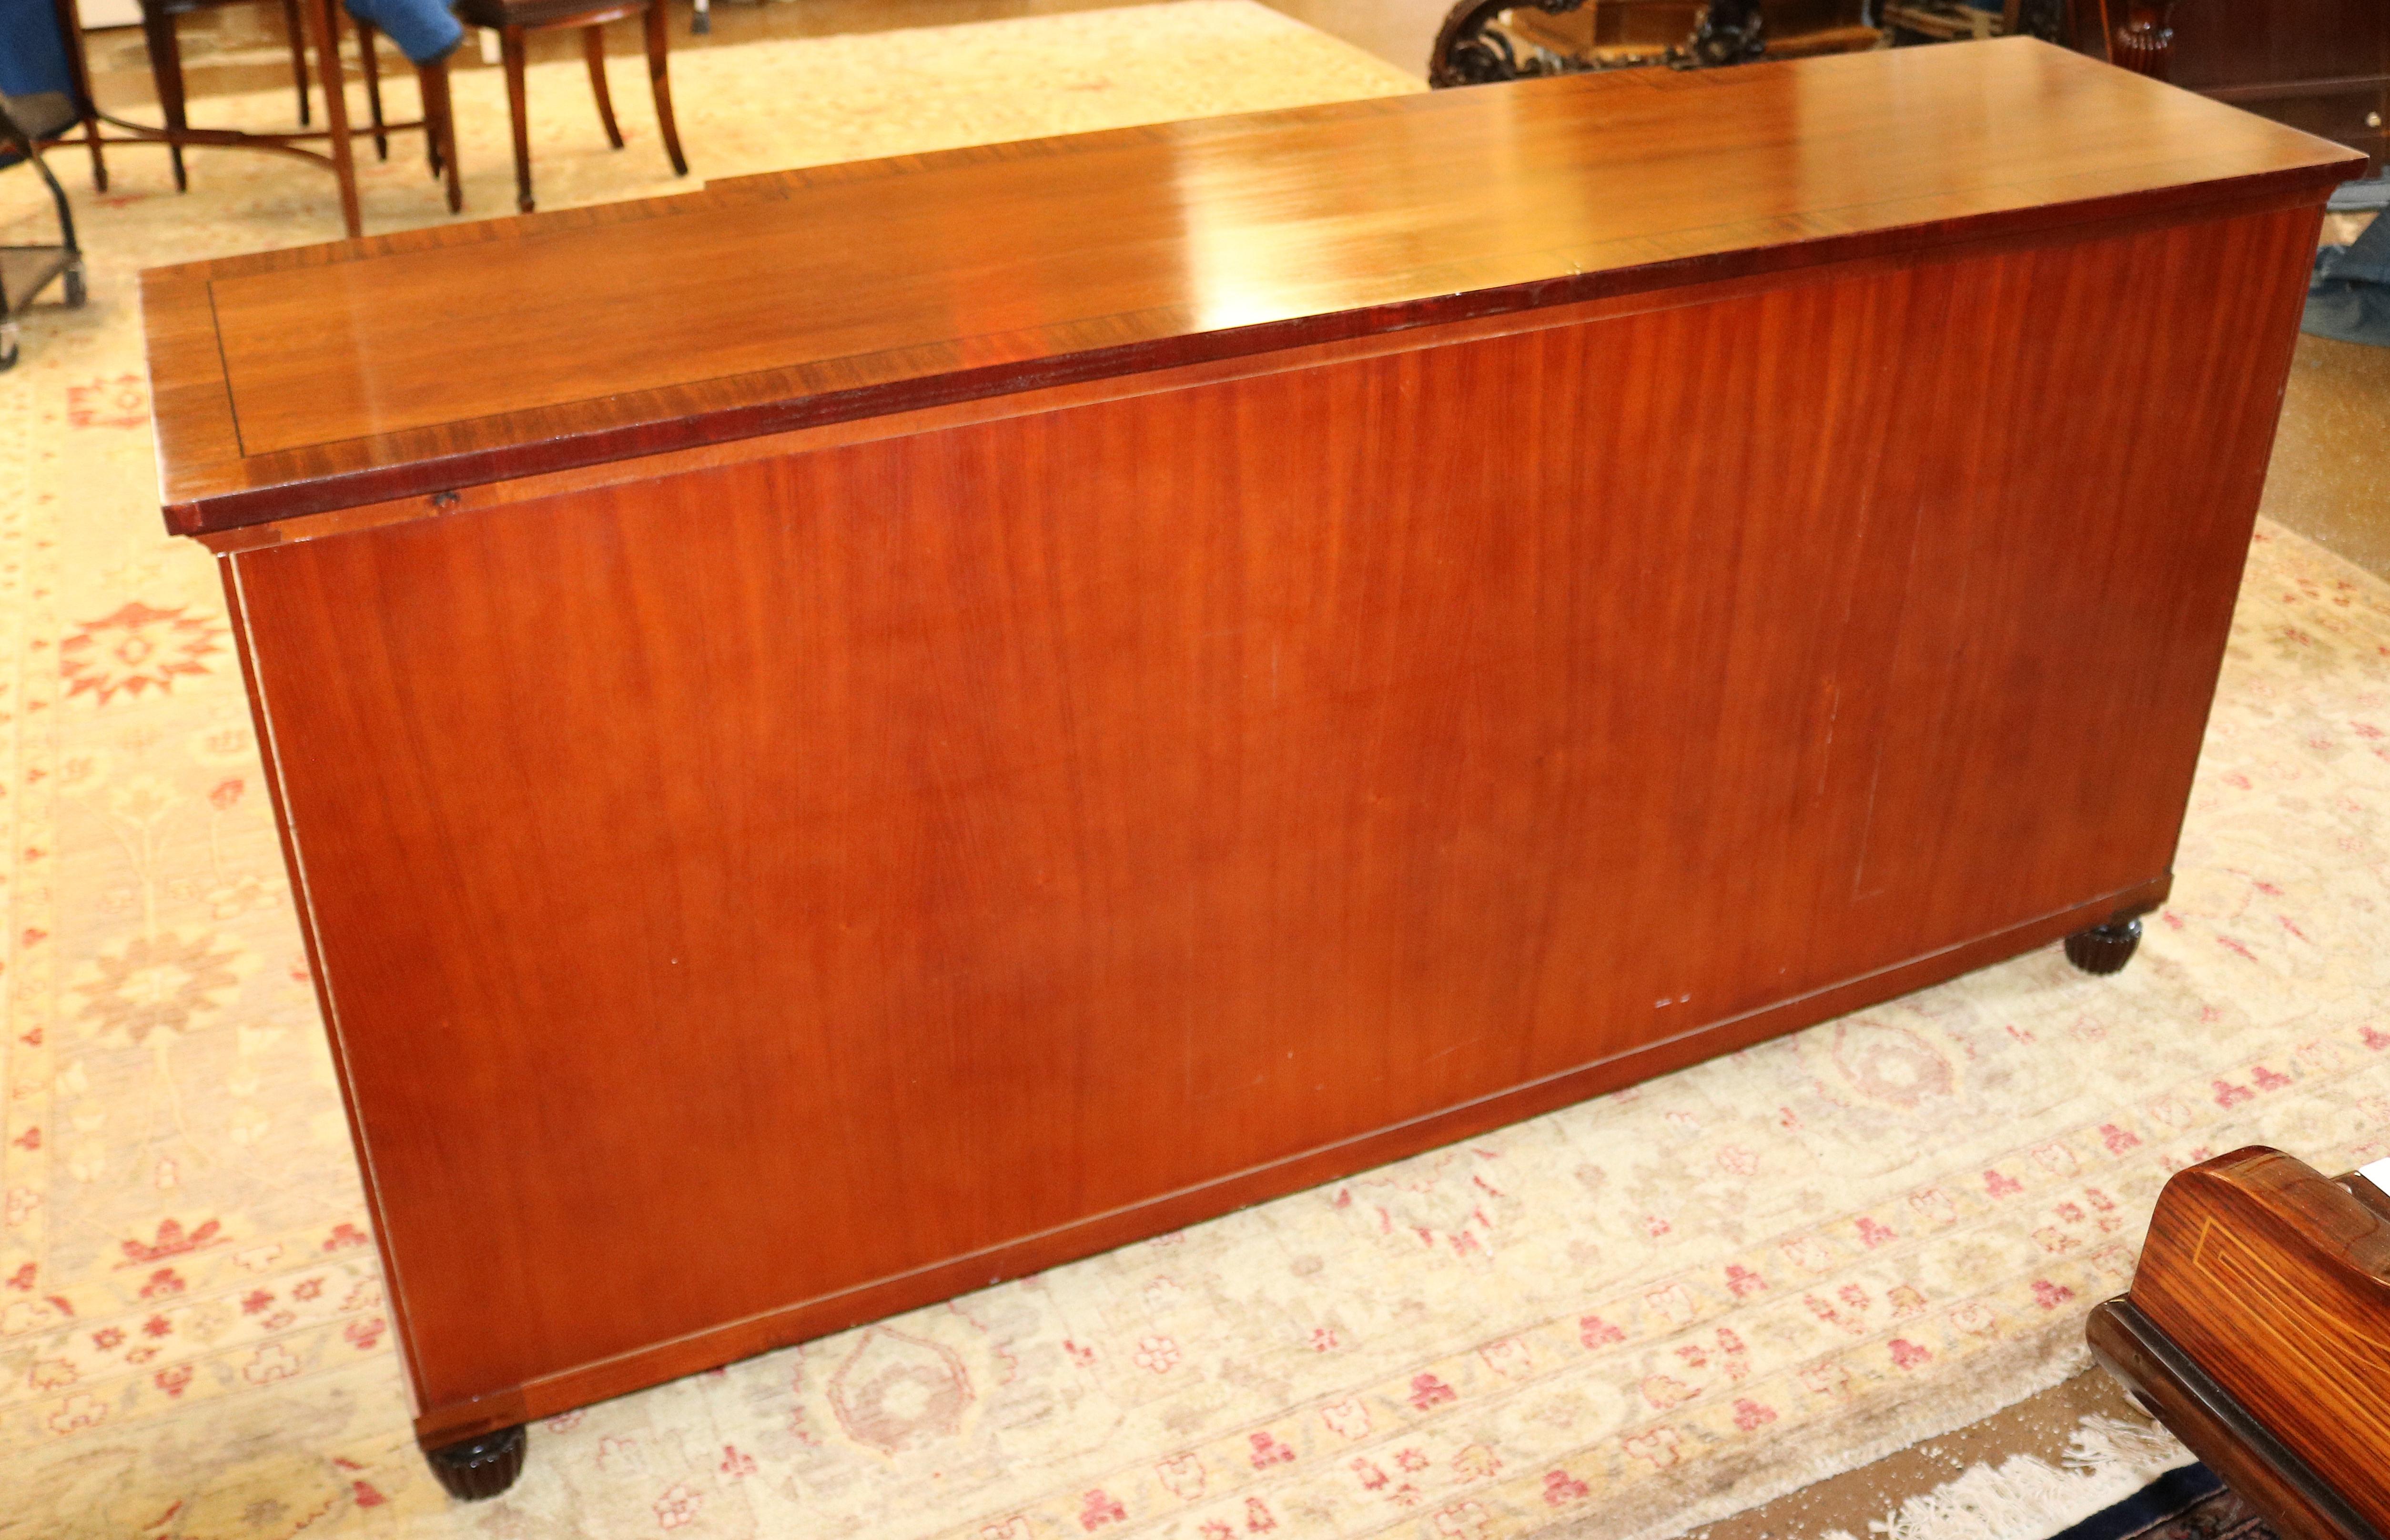 Baker Mahogany Neoclassical French Empire Style Credenza Server Sideboard  Dime 10